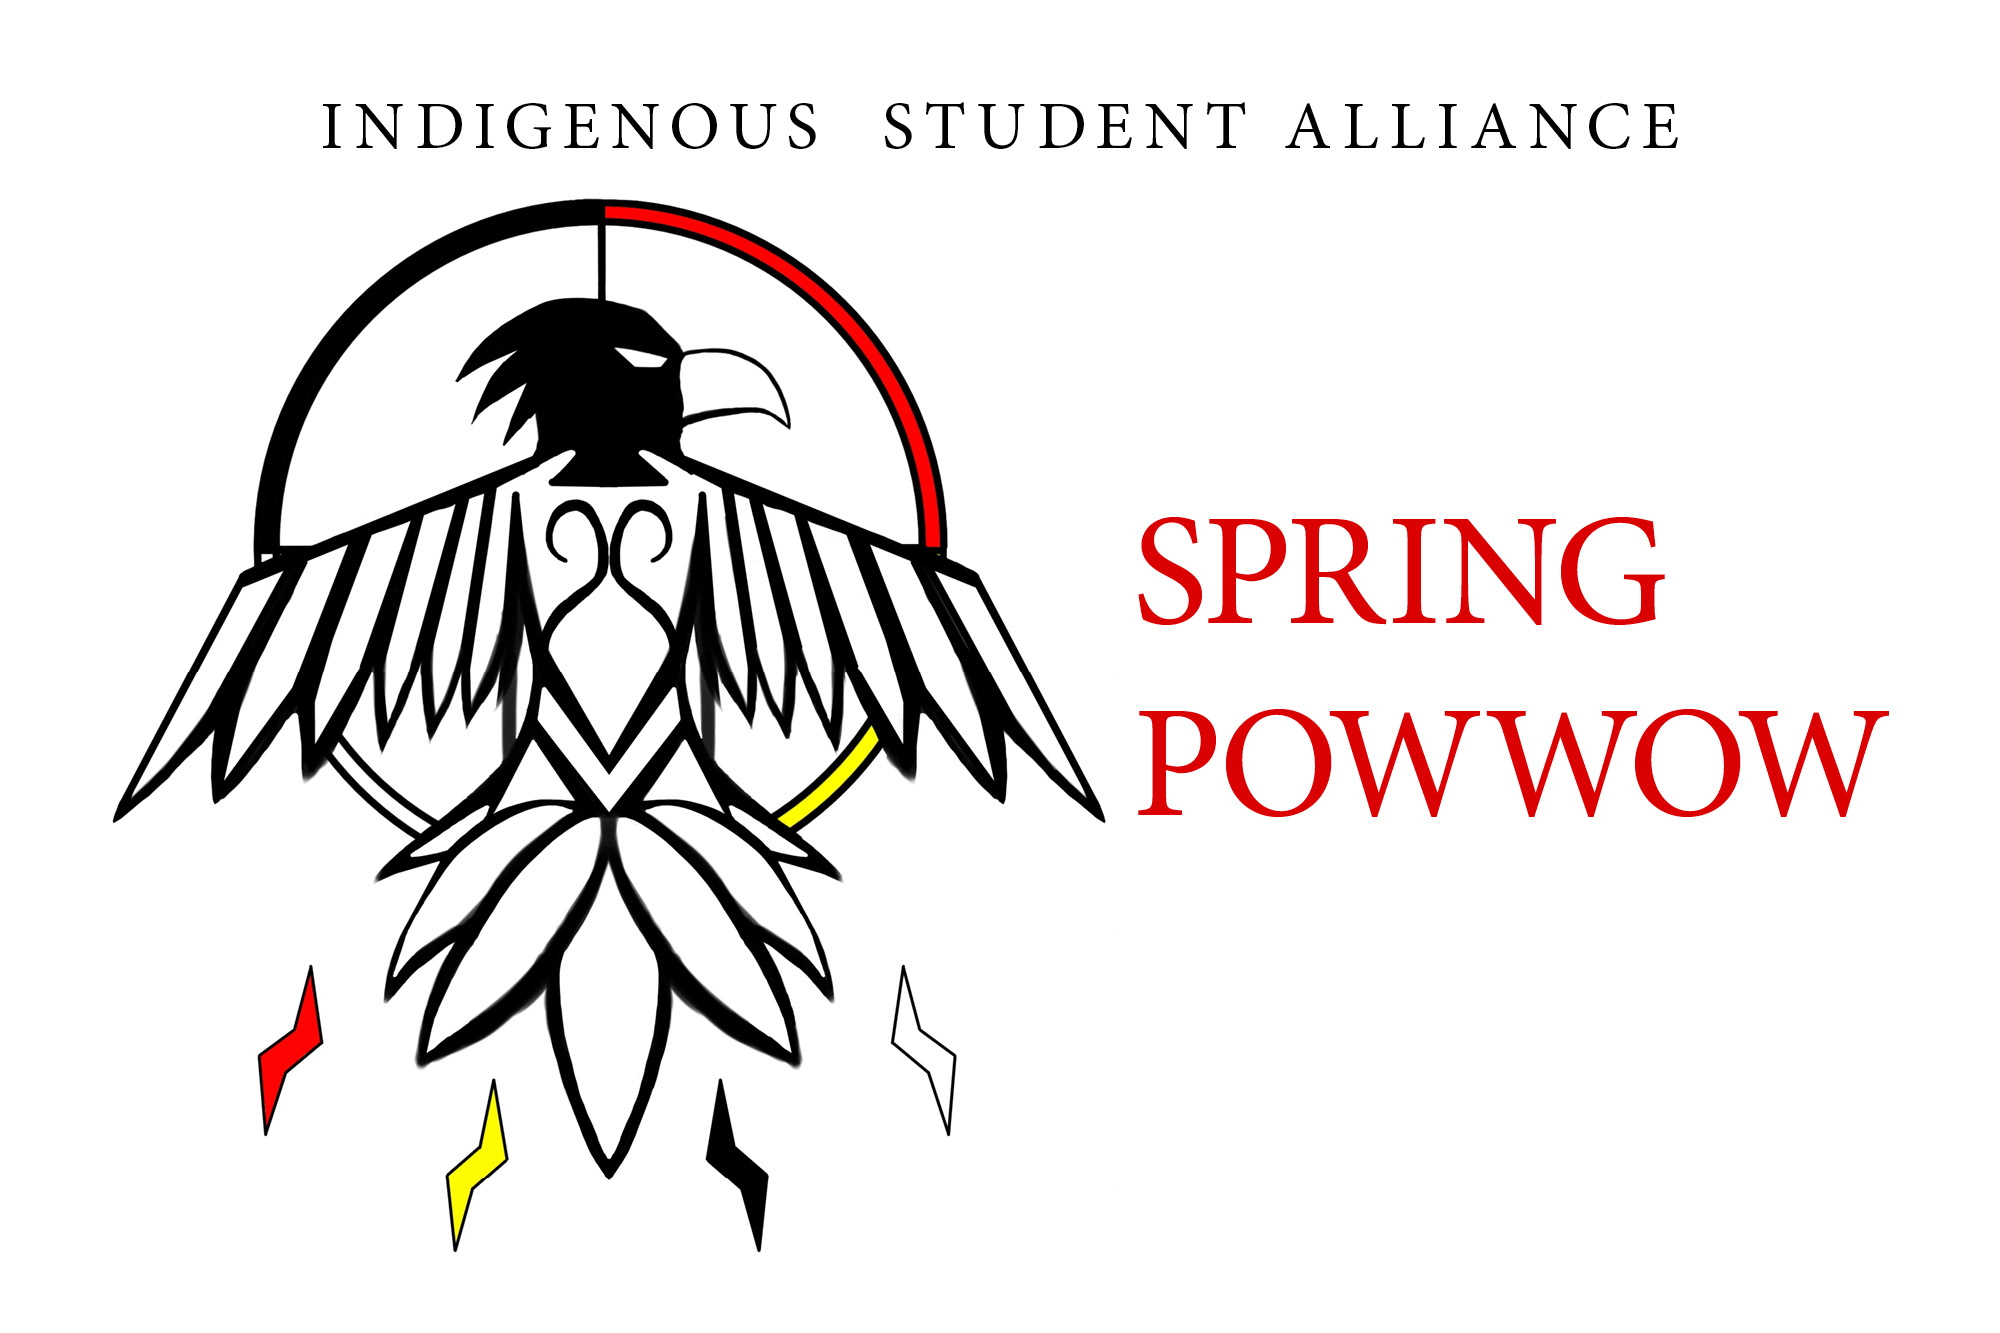 Image for press release for the Casper College Spring Powwow.